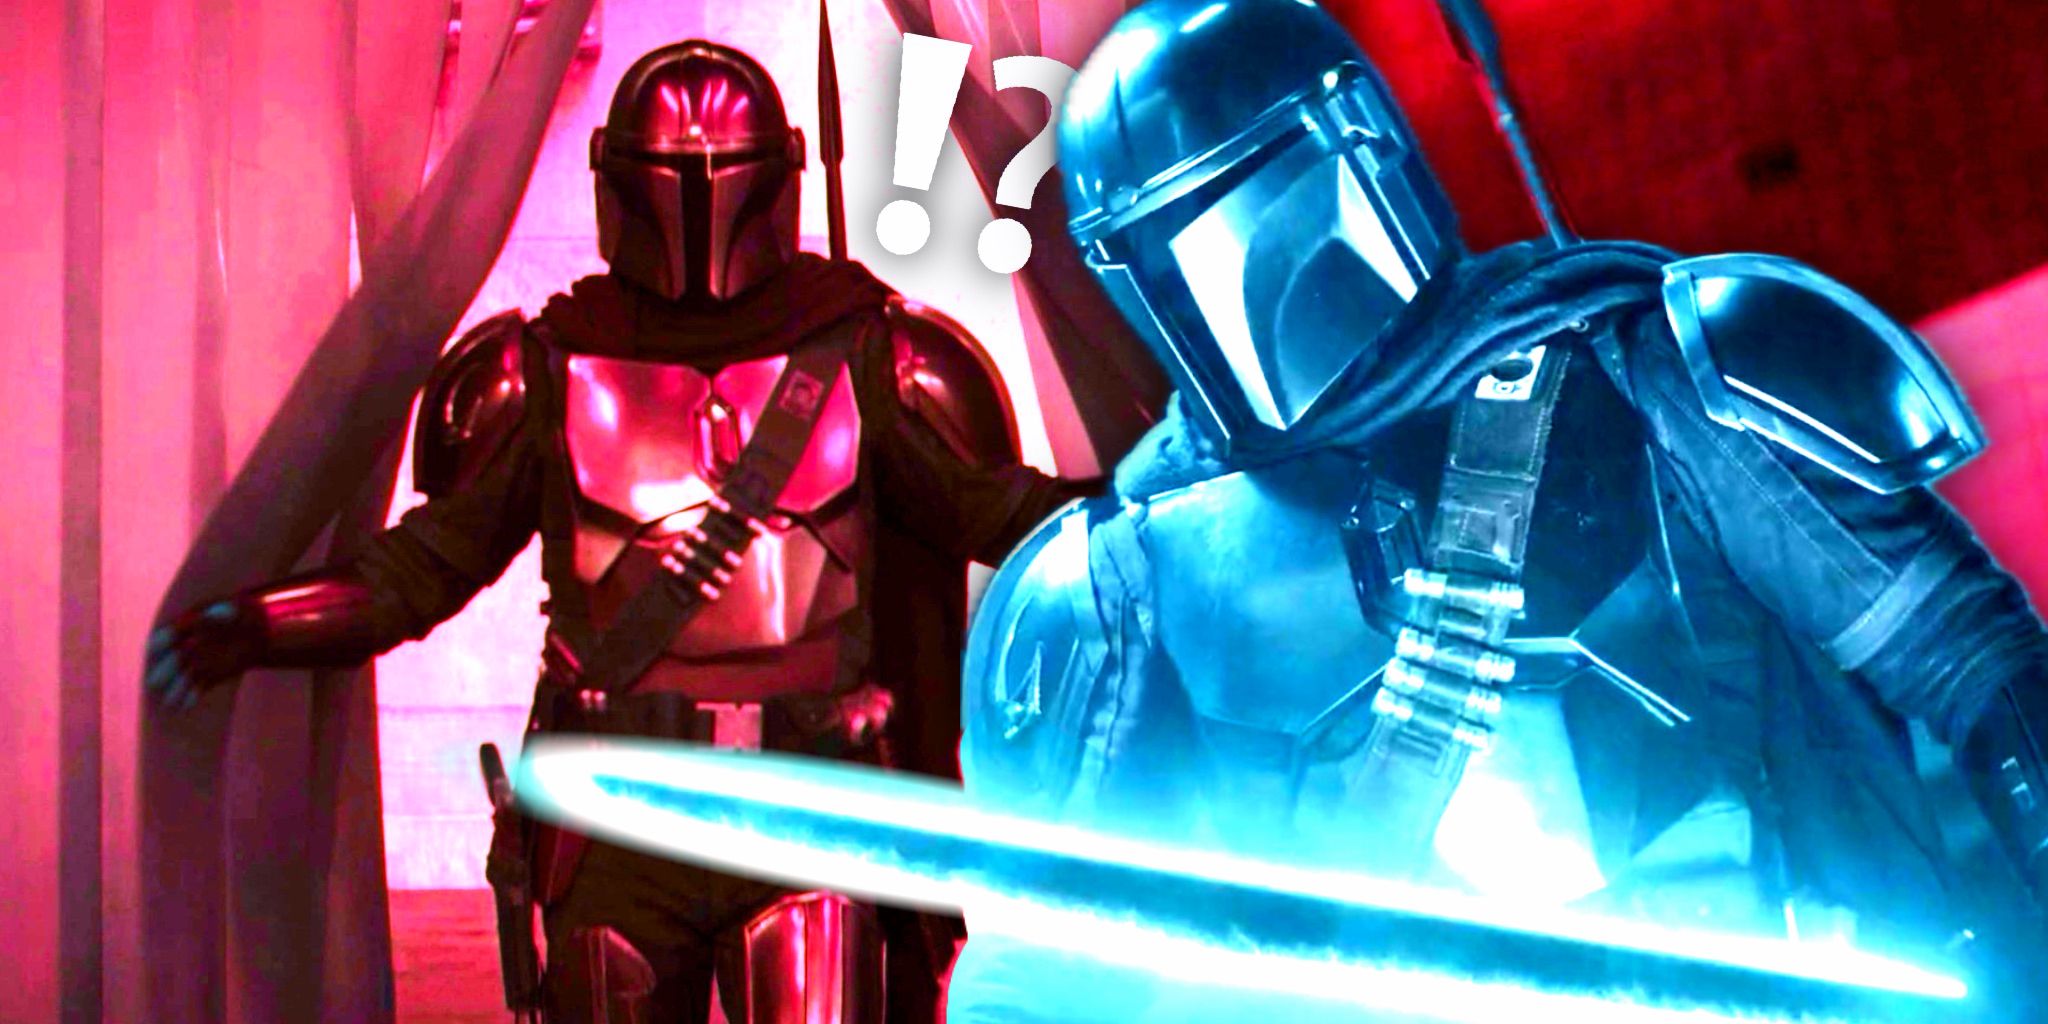 Din Djarin with the Darksaber superimposed over Din Djarin's return in The Book of Boba Fett chapter 5